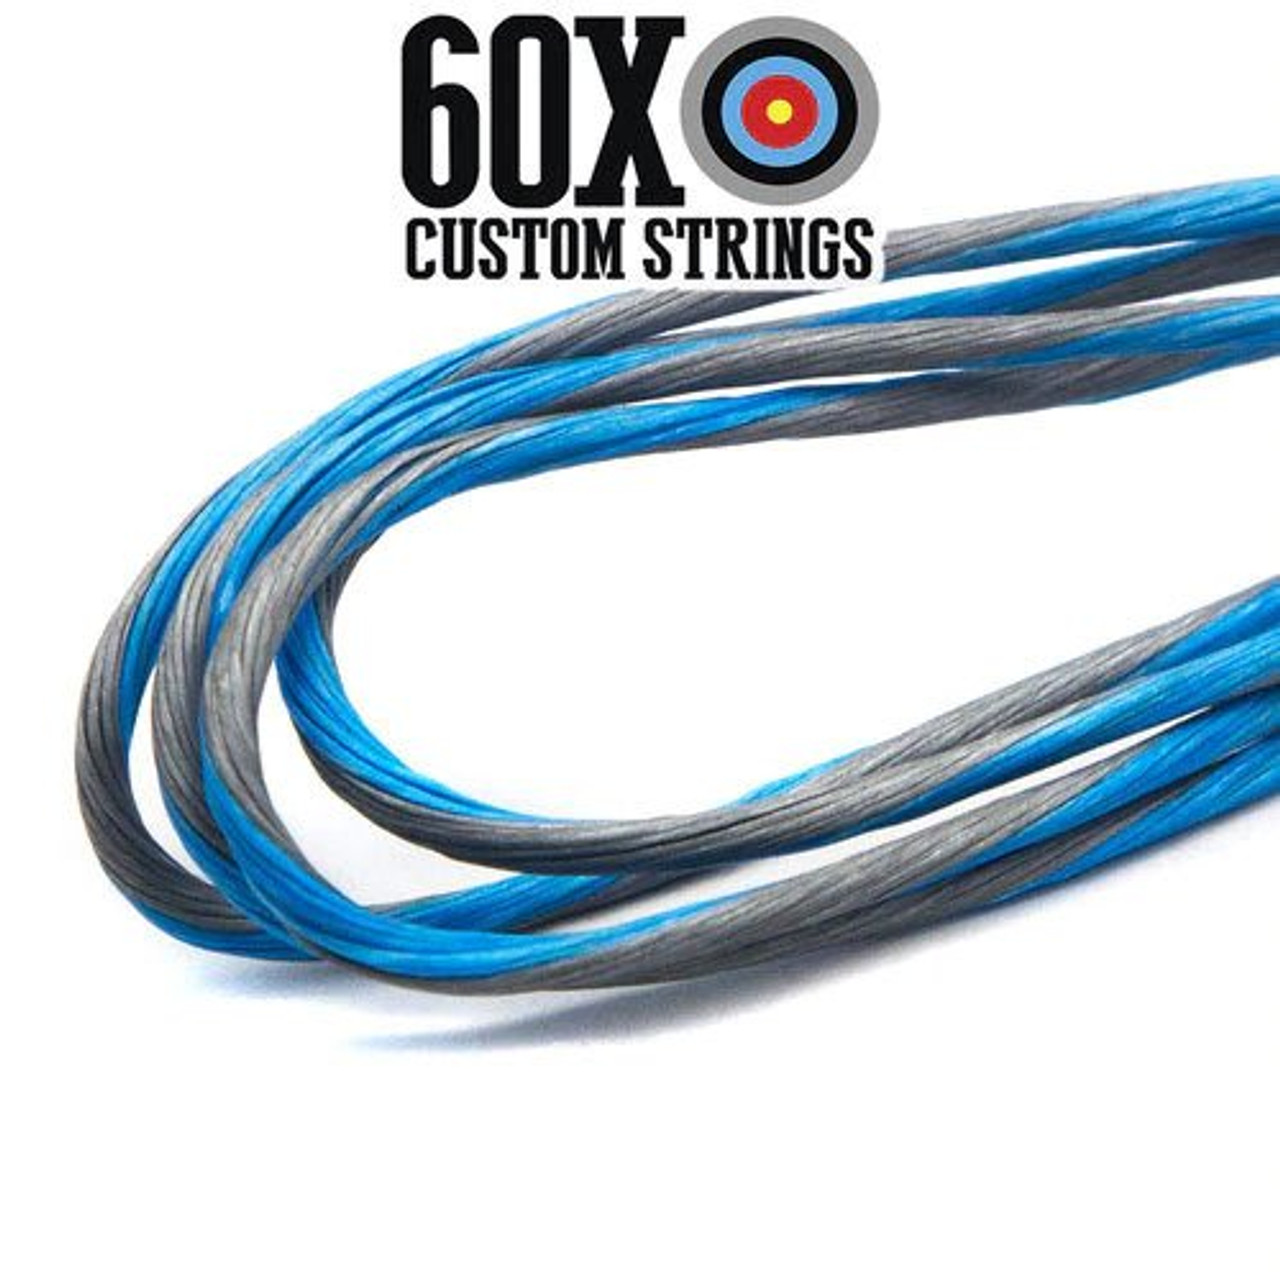 PSE Vendetta XS Bowstring & Cable set by 60X Custom Strings 